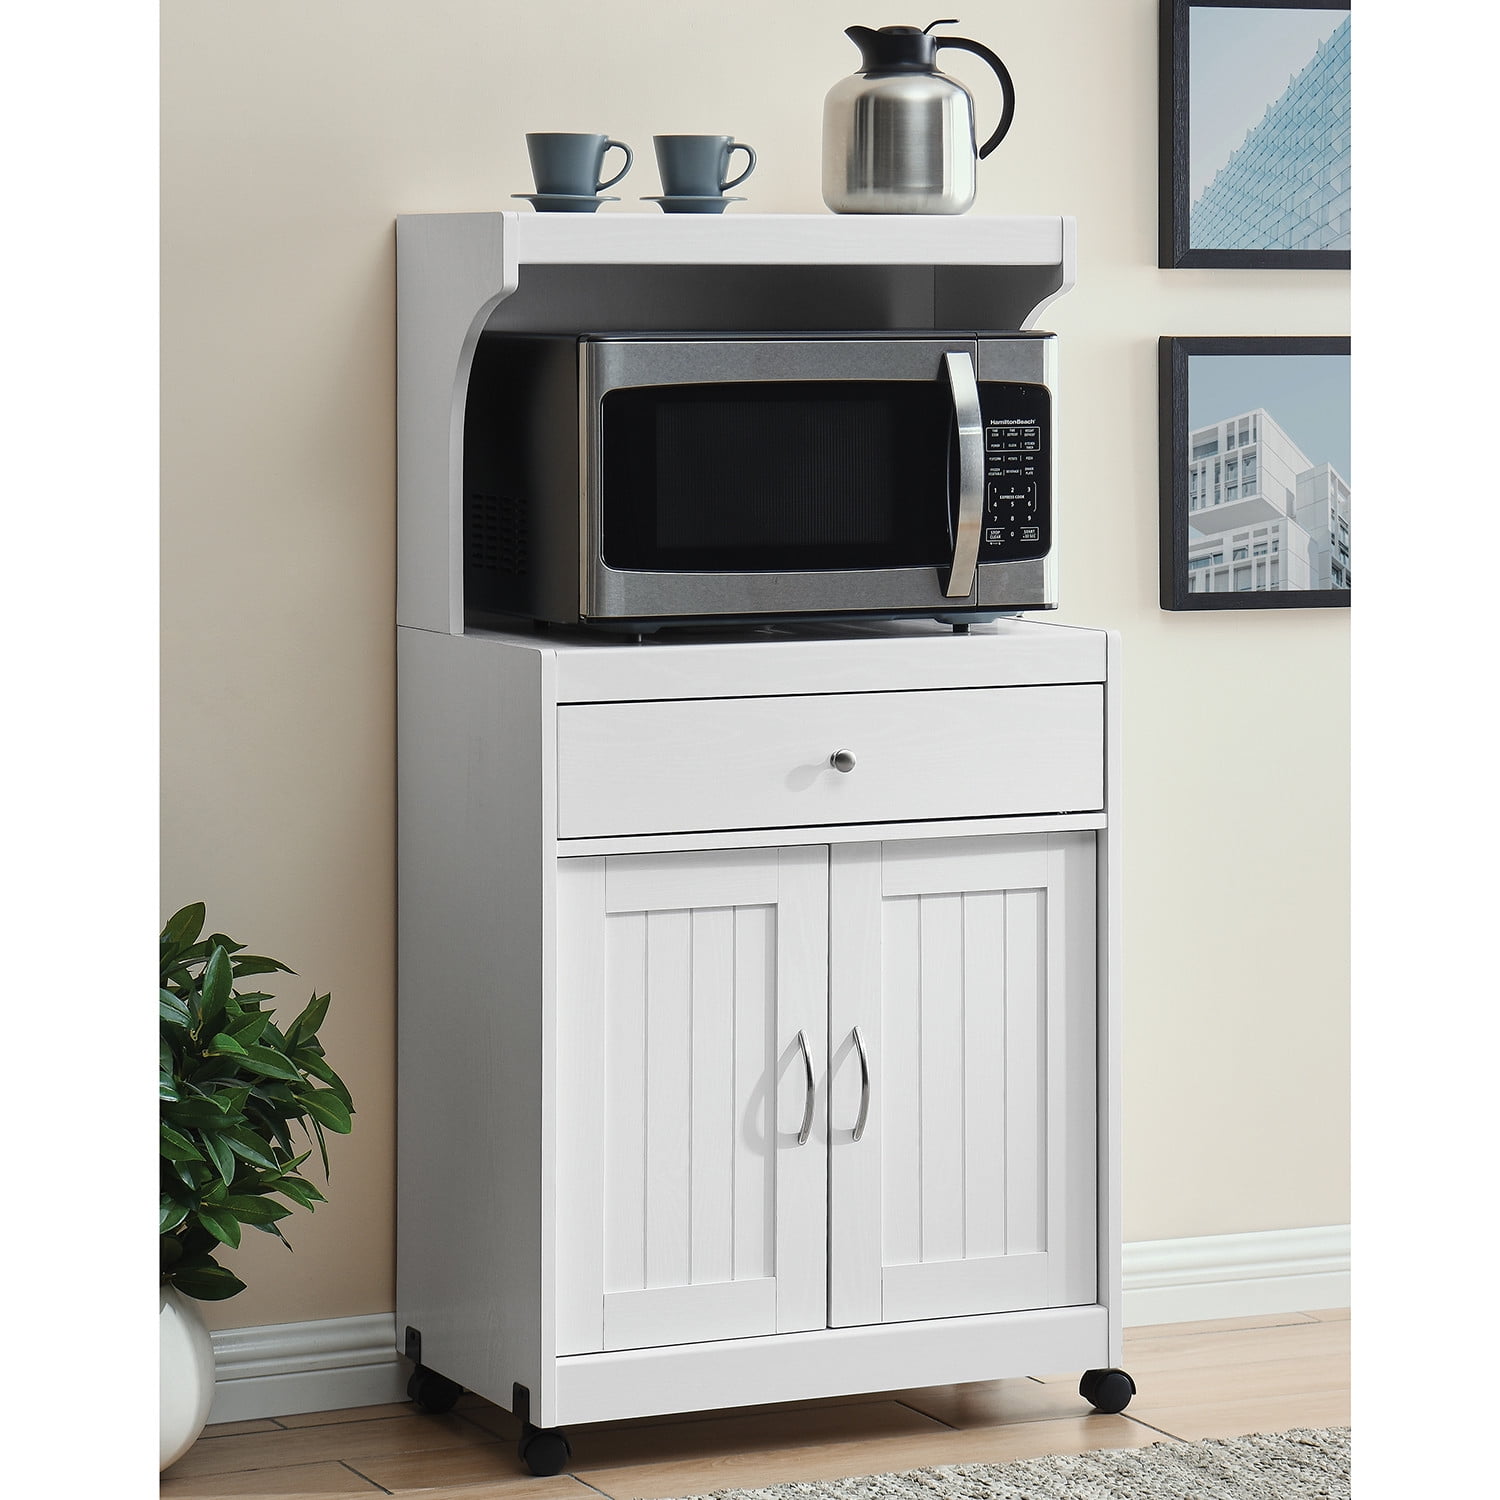 Landry 2 Door Utility Microwave Cart with Shelves – RealRooms